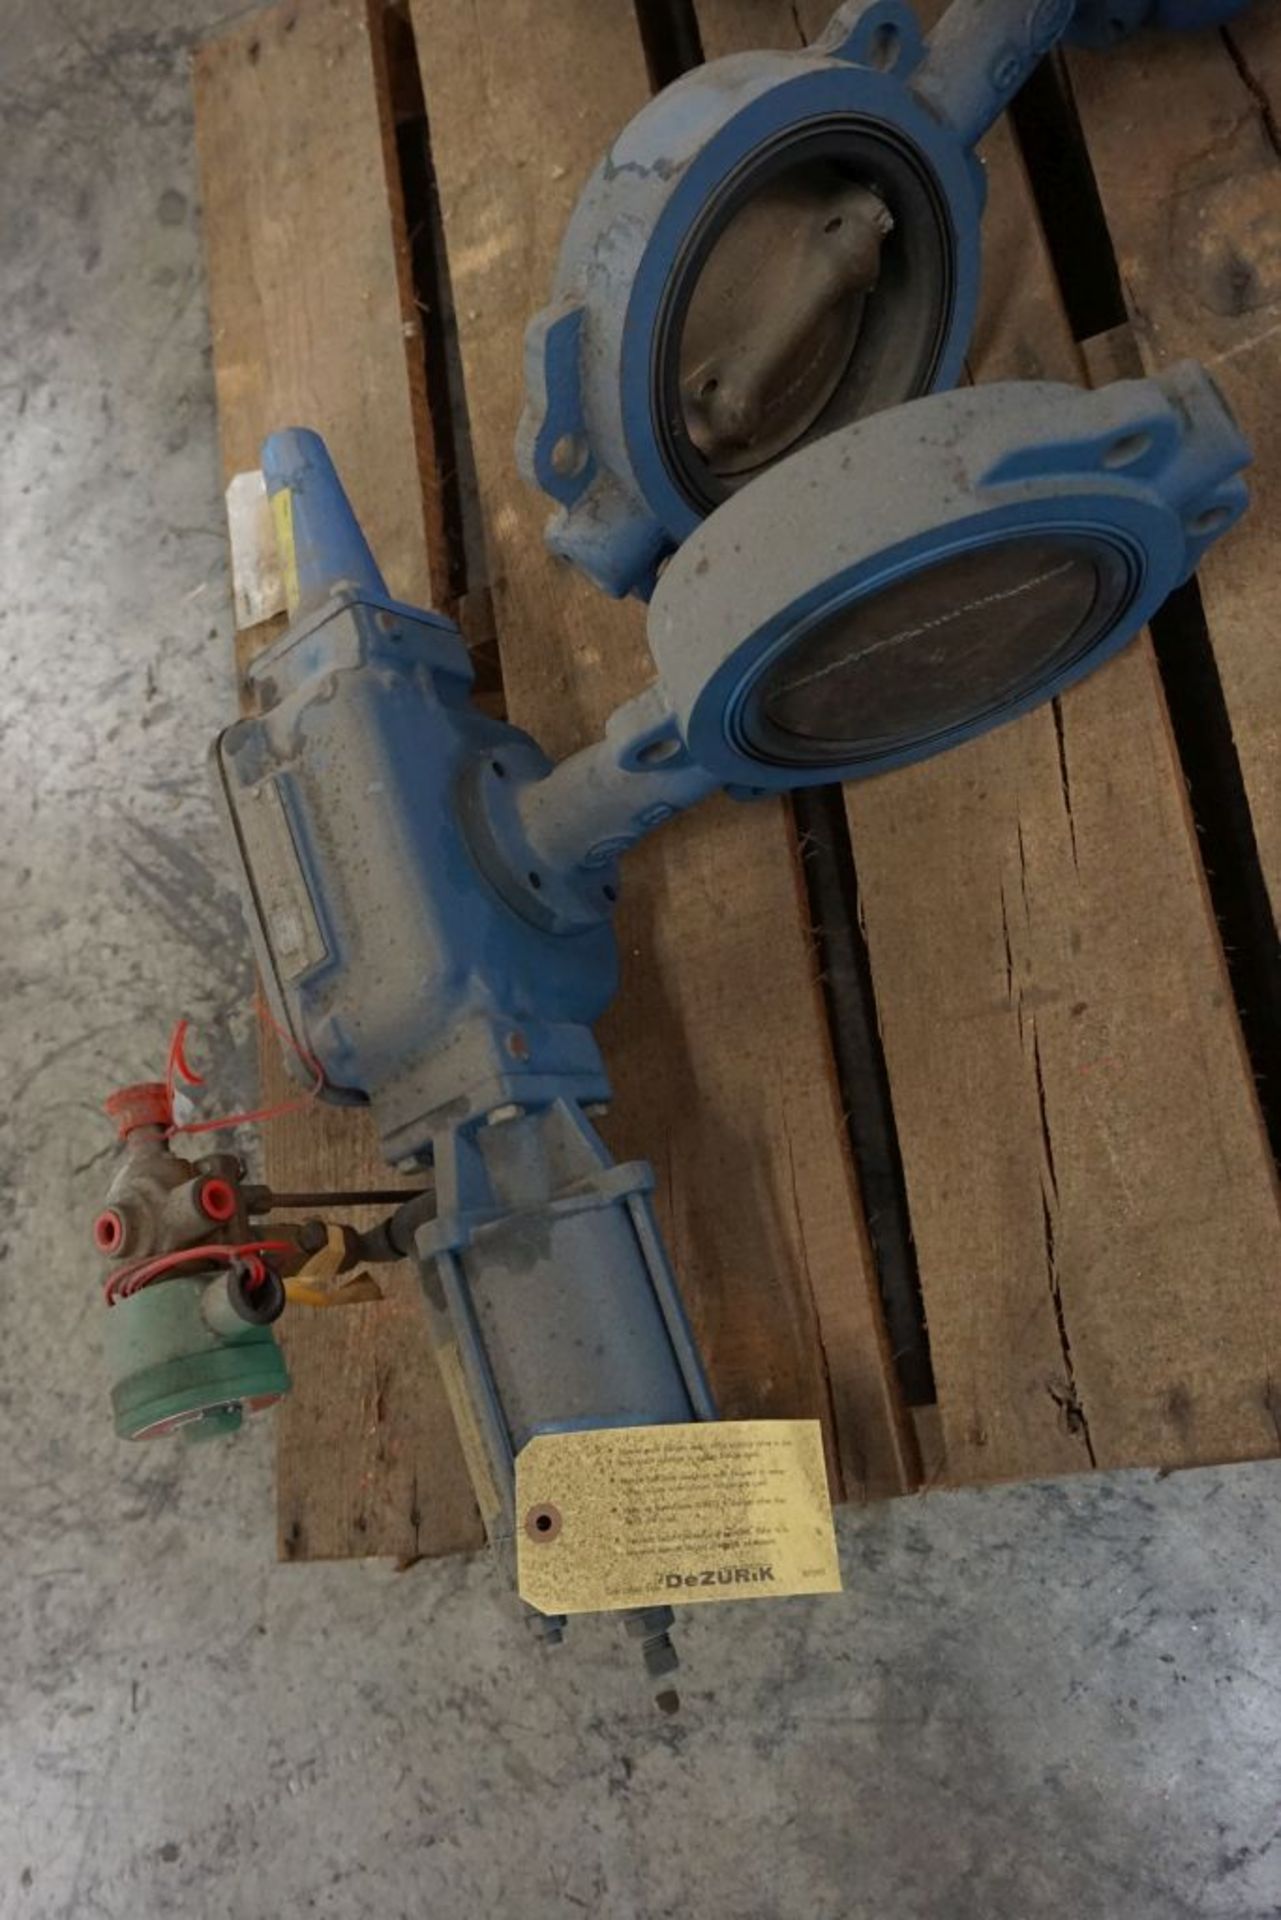 Lot of (2) 6" Butterfly Valves w/DeZurik Actuators|Lot Loading Fee: $5.00 - Image 2 of 9